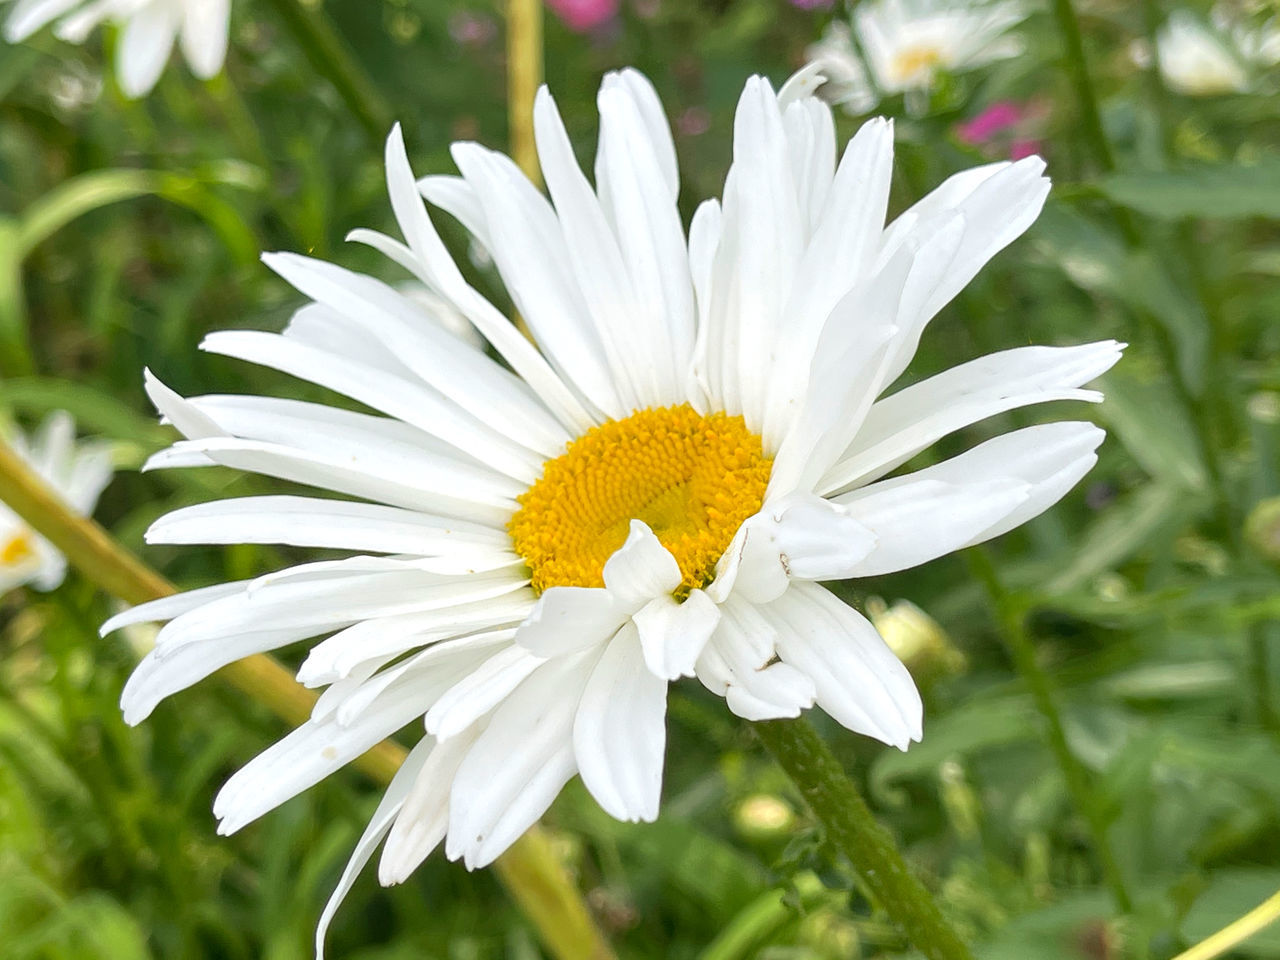 CLOSE-UP OF WHITE DAISY WITH YELLOW FLOWER